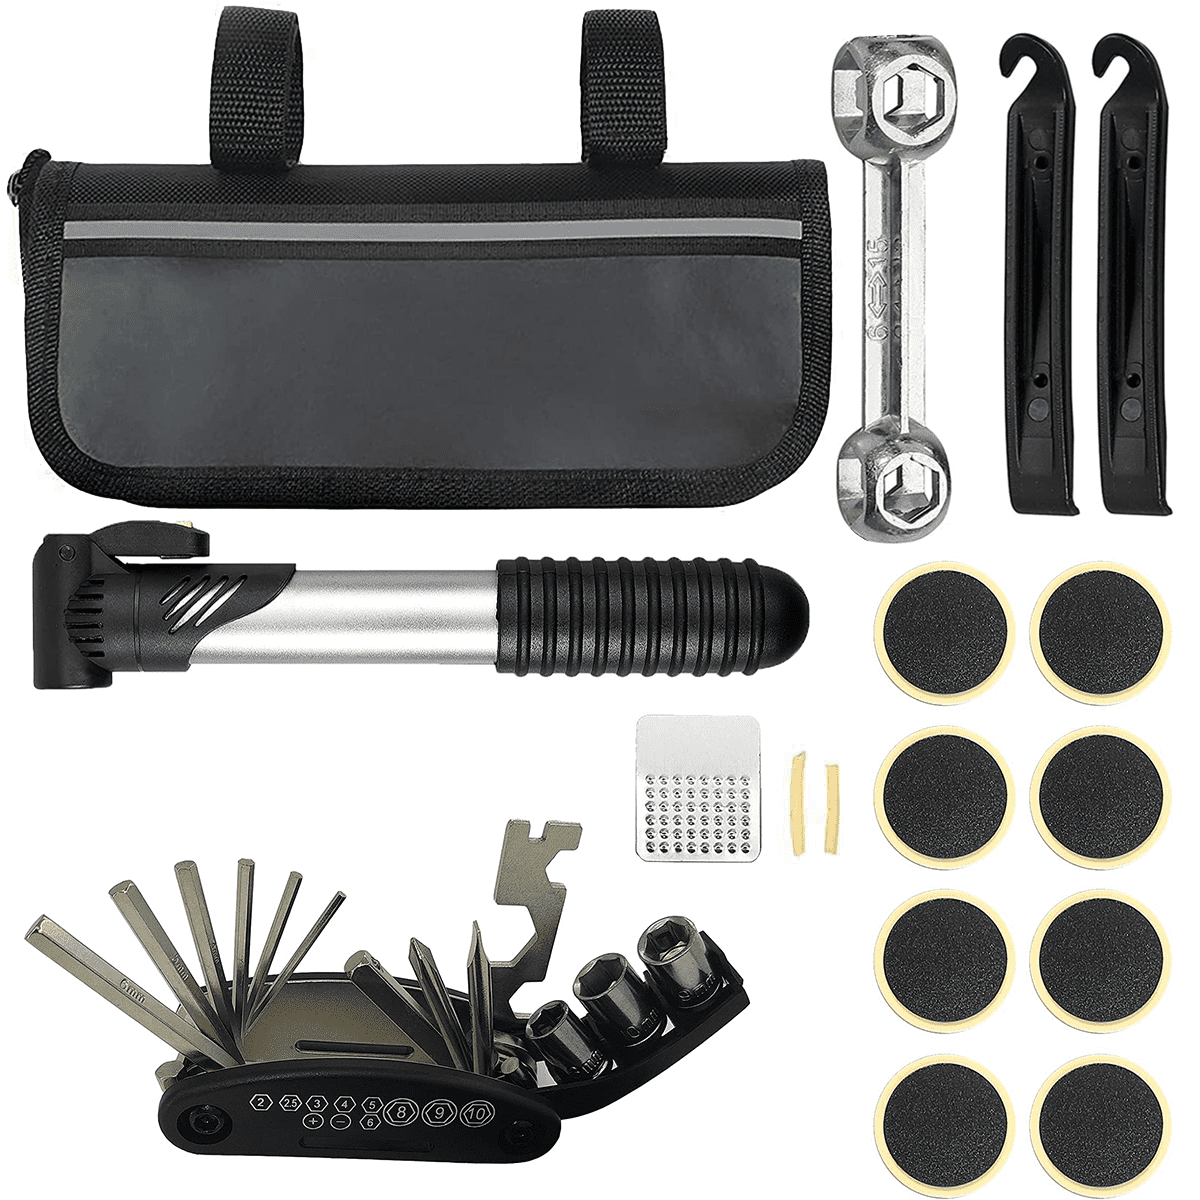 103pc Tire & Rubber Patch Kit for Auto, Car, Bicycle Repairs with Assort  Patches